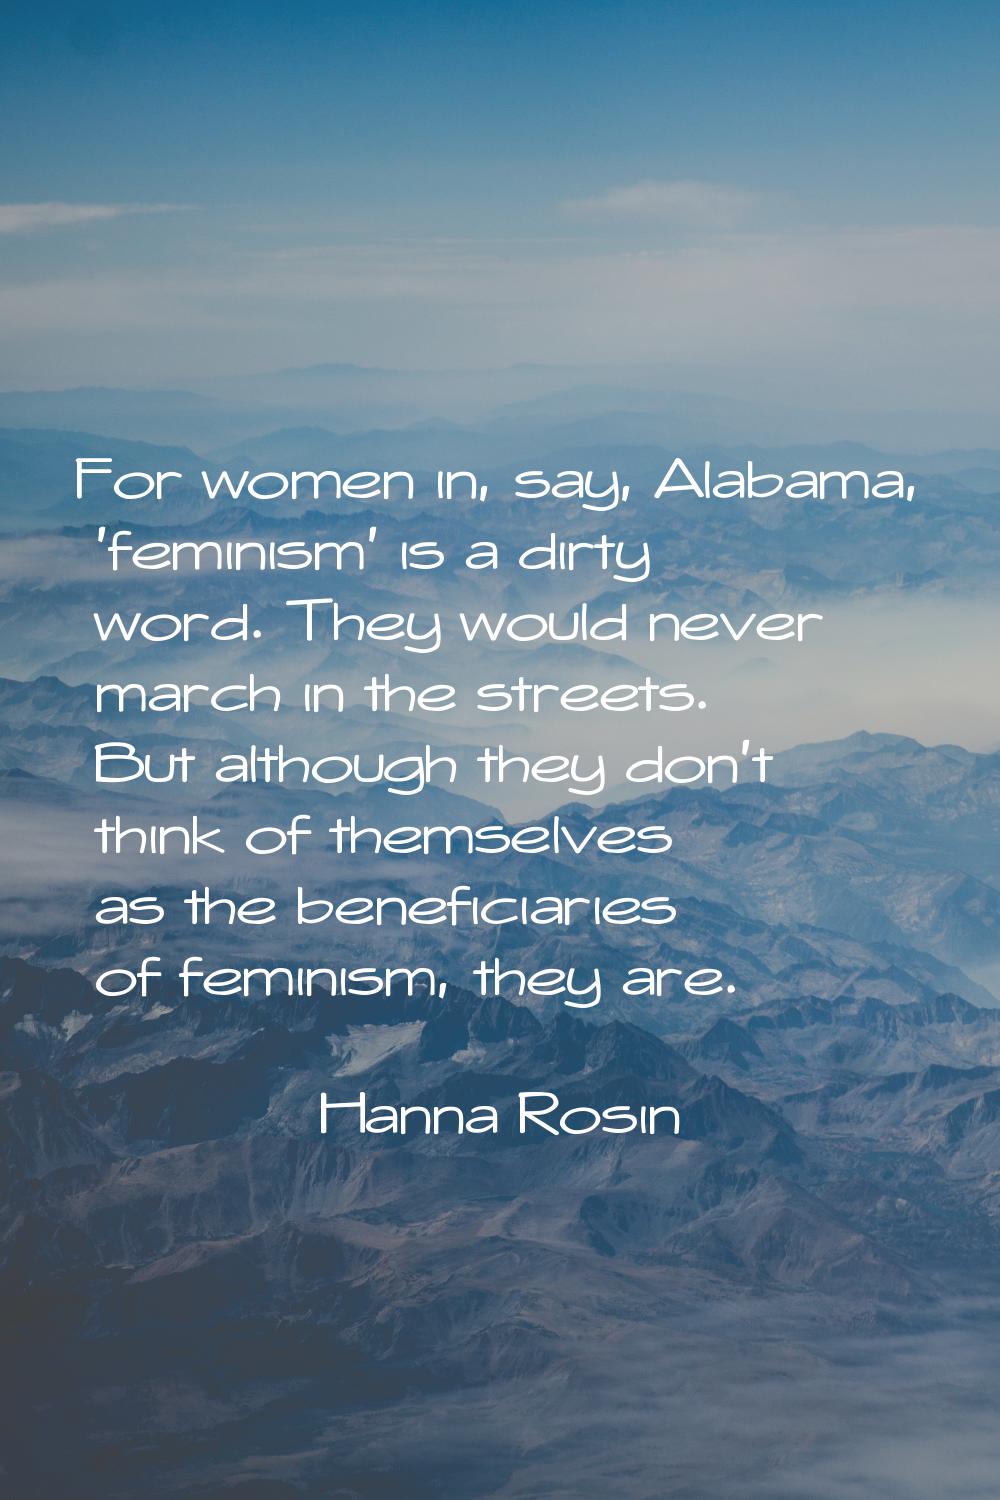 For women in, say, Alabama, 'feminism' is a dirty word. They would never march in the streets. But 